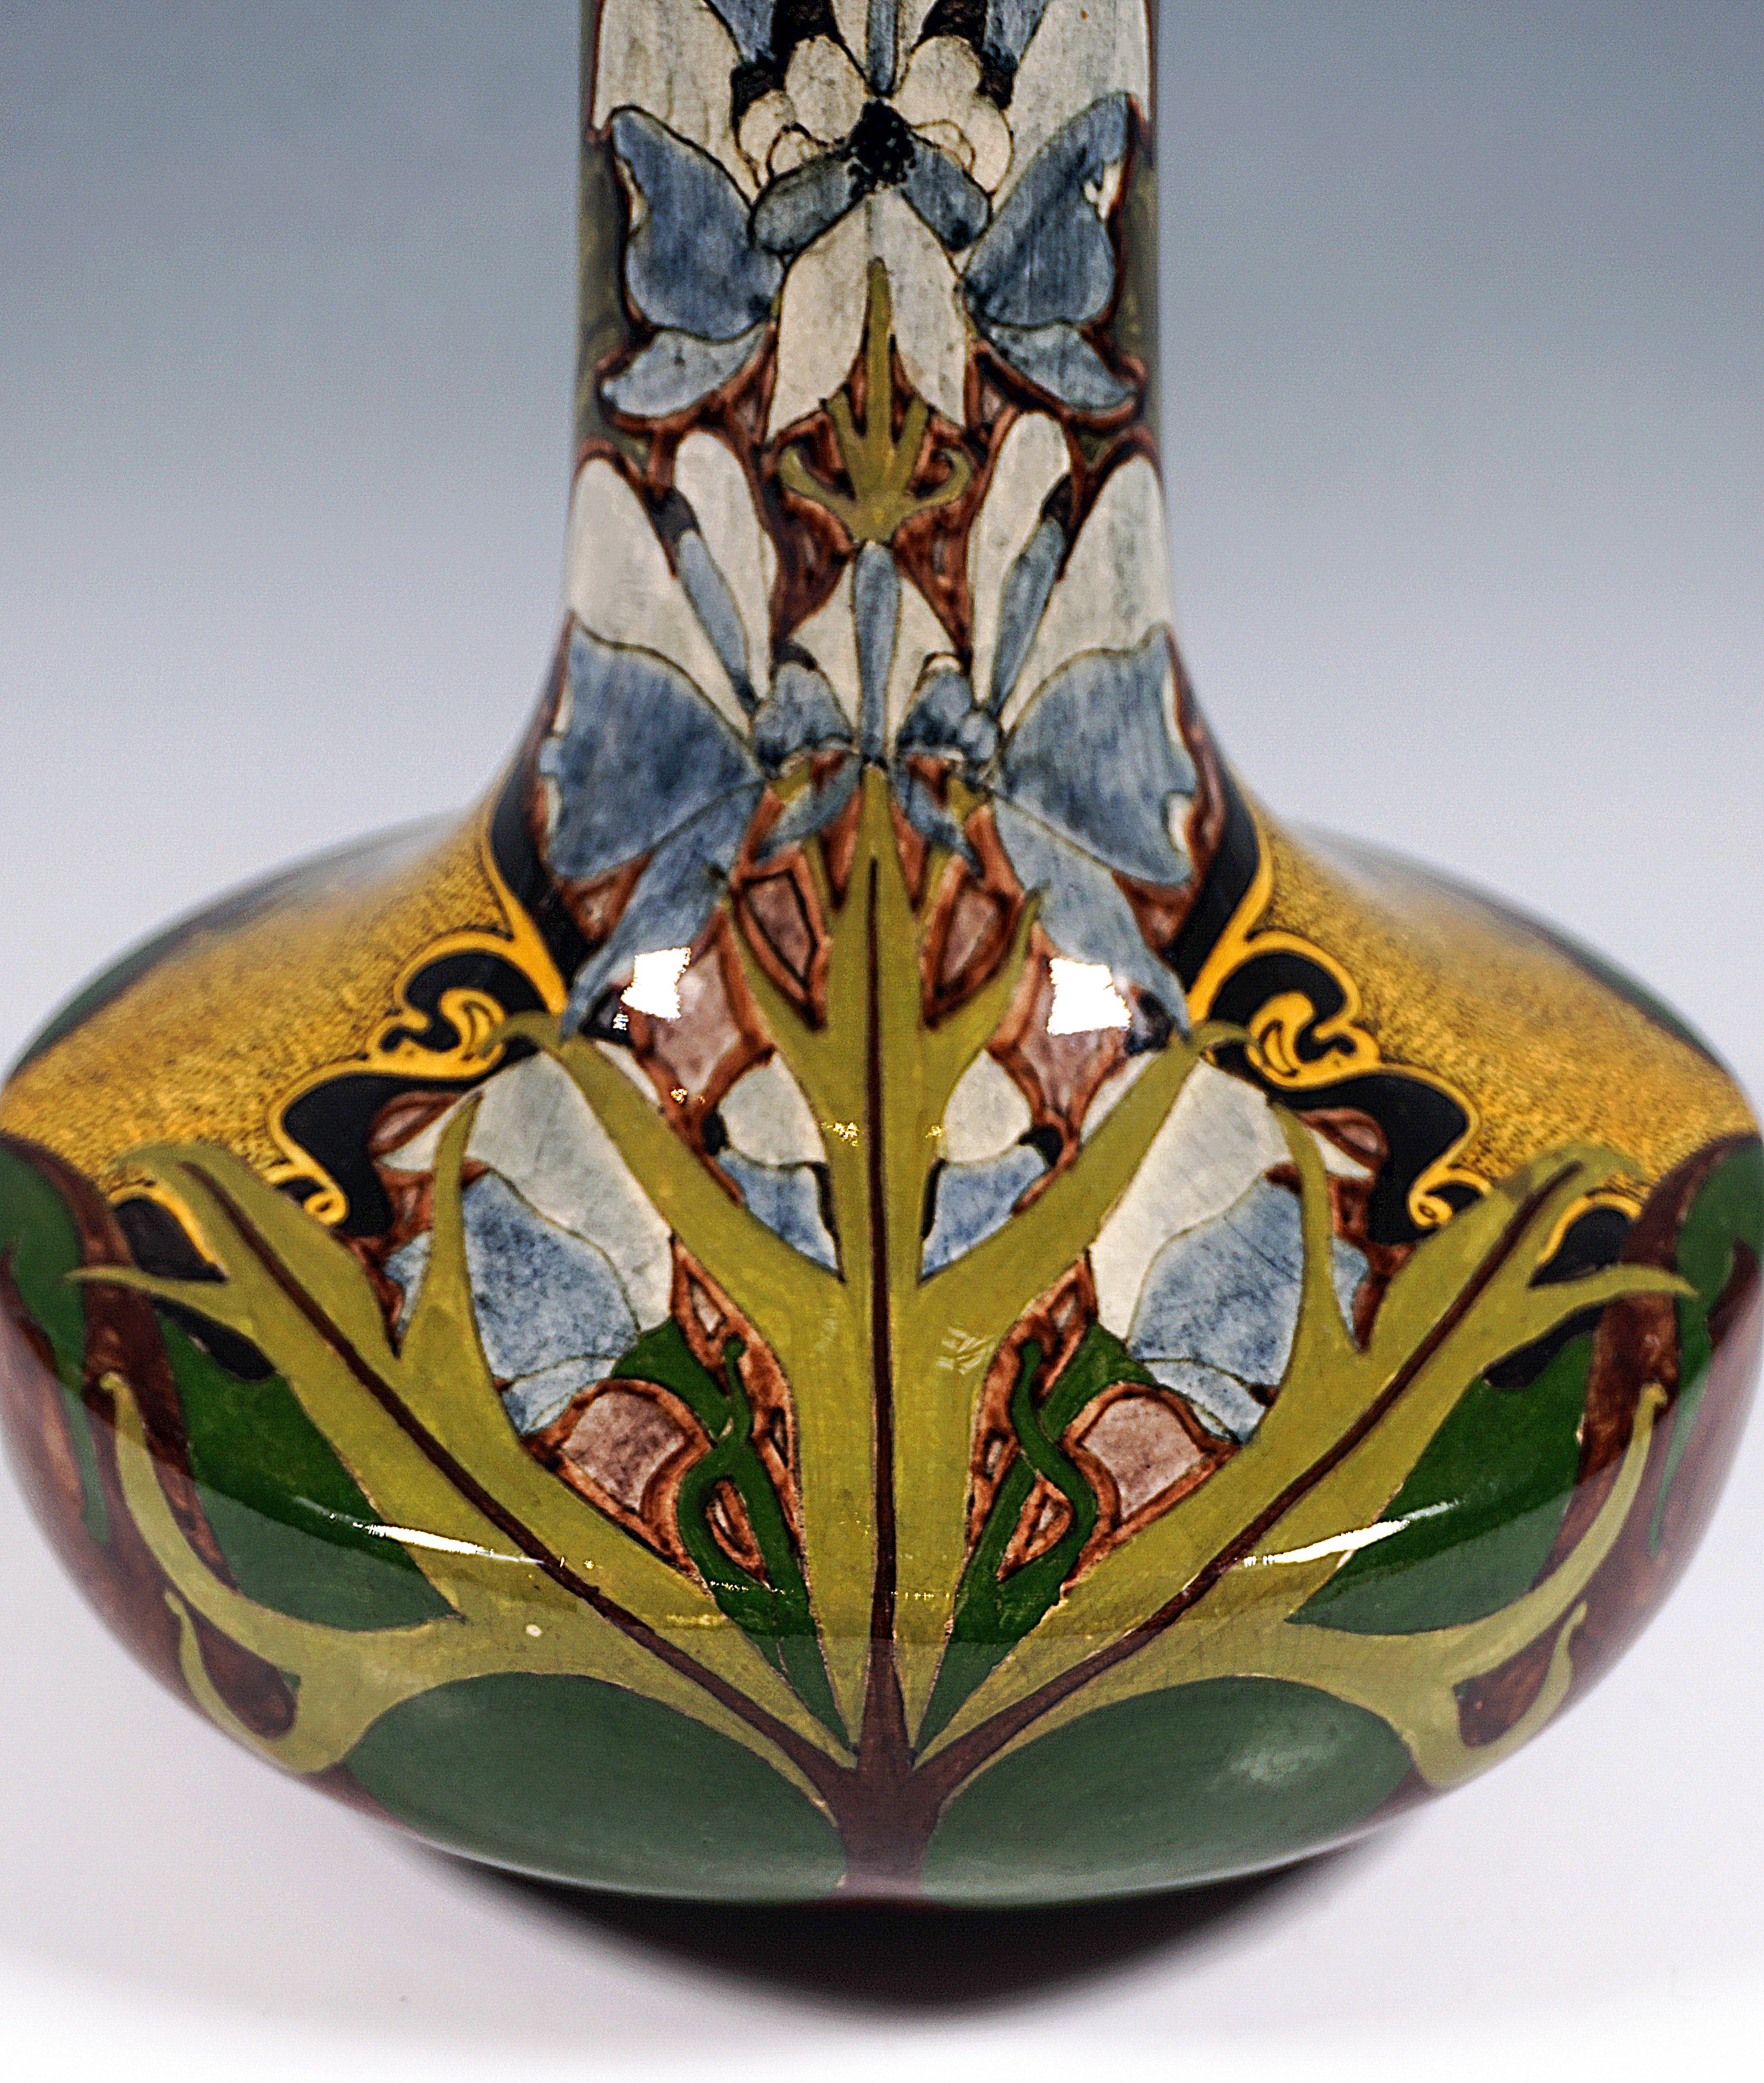 Hand-Crafted Art Nouveau Faience Long Neck Vase, Aconite Decor, by Nicholaas Brantjes Holland